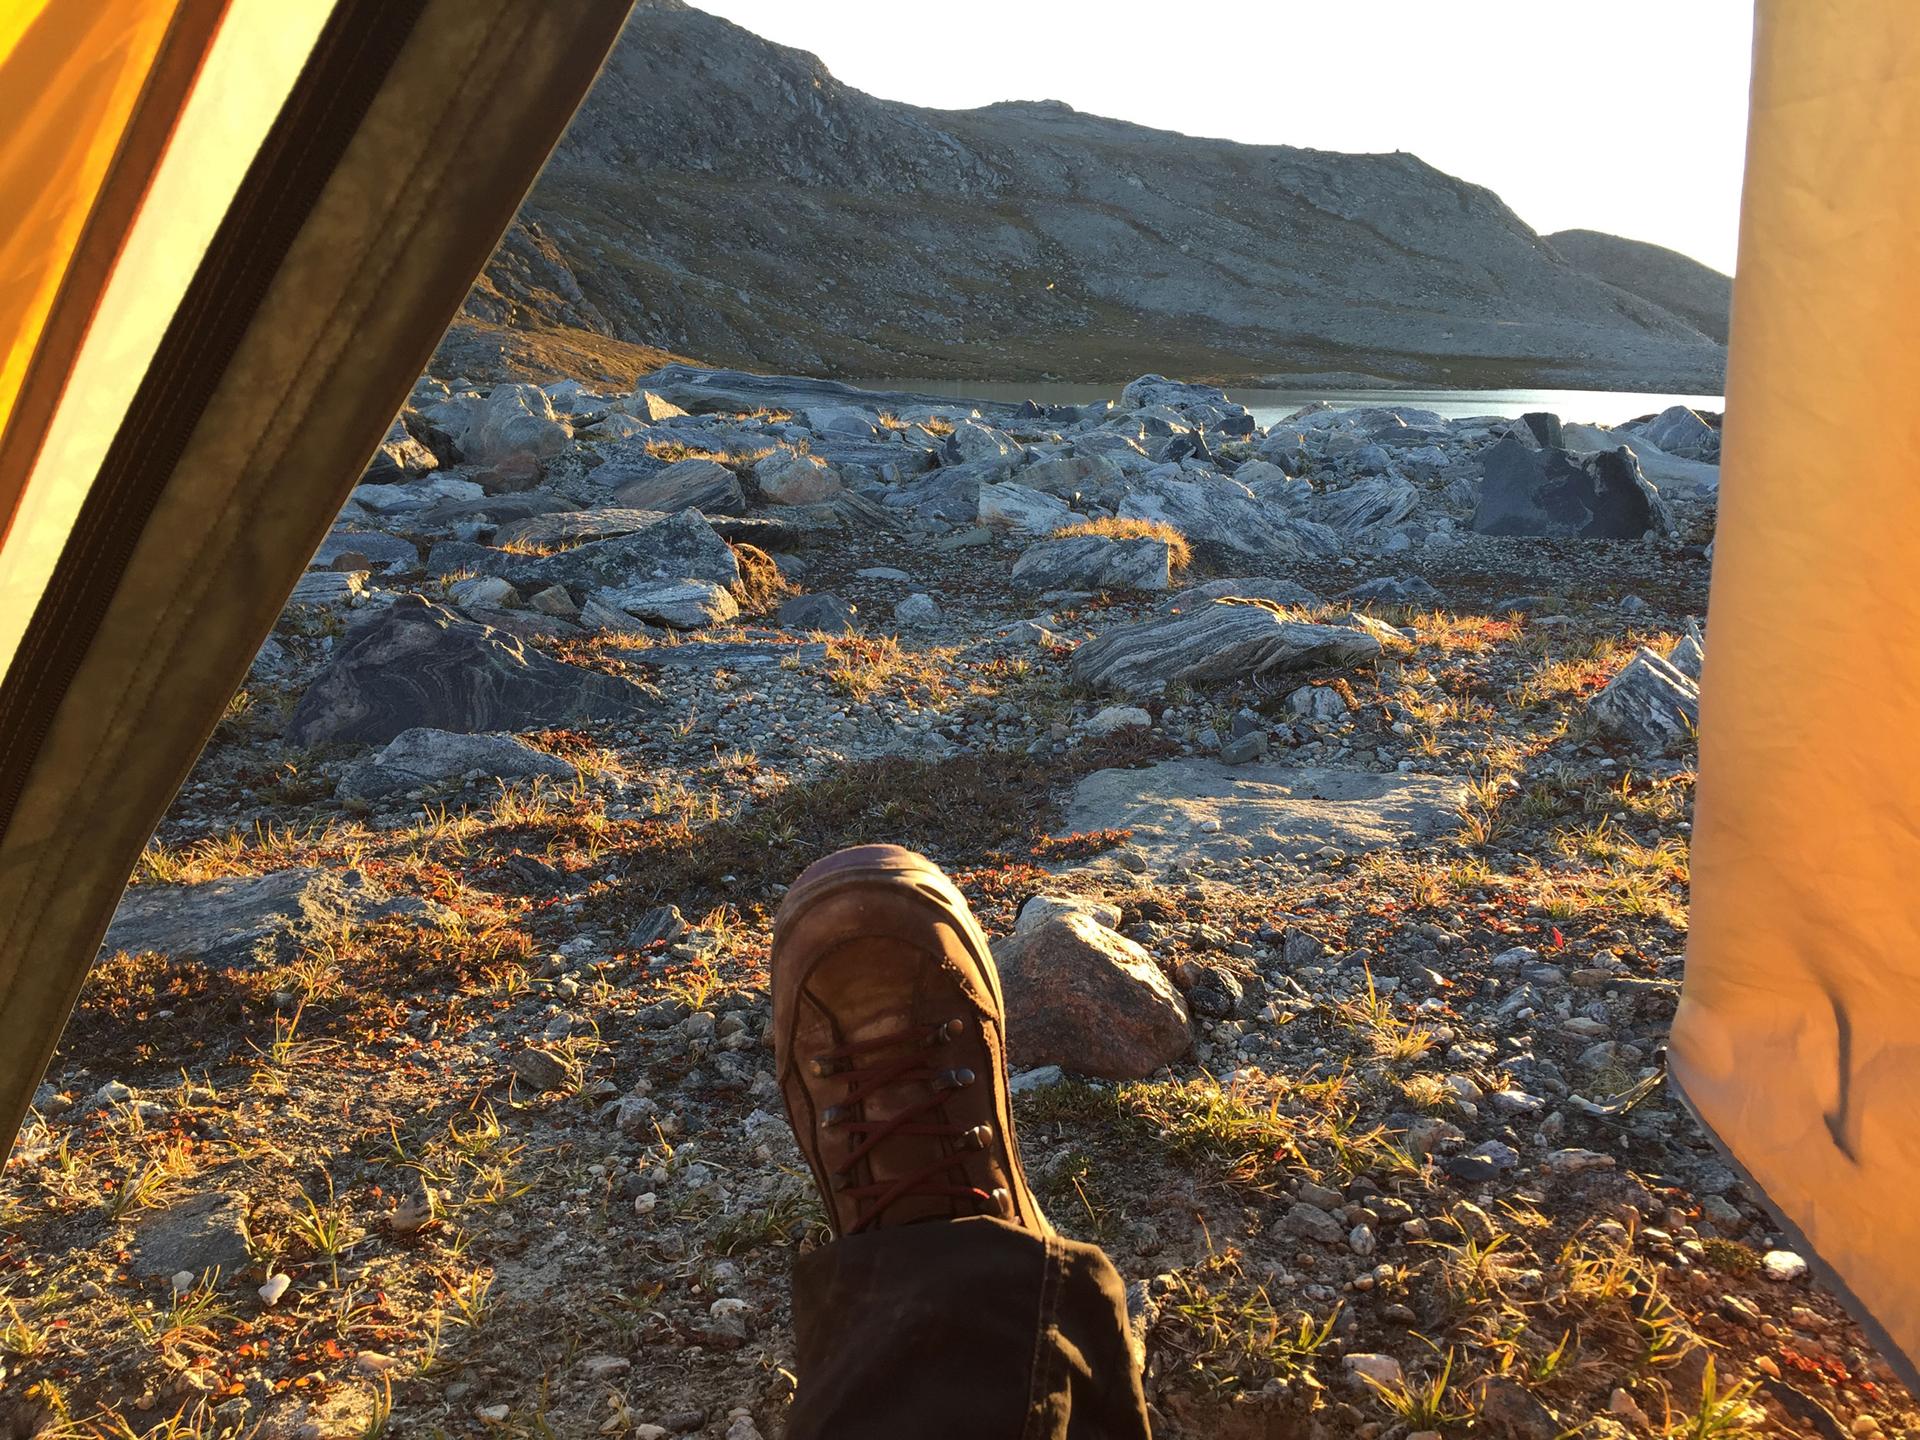 A woman's booted foot is framed by the walls of her tent as the golden sunlight spills over rocky terrain.